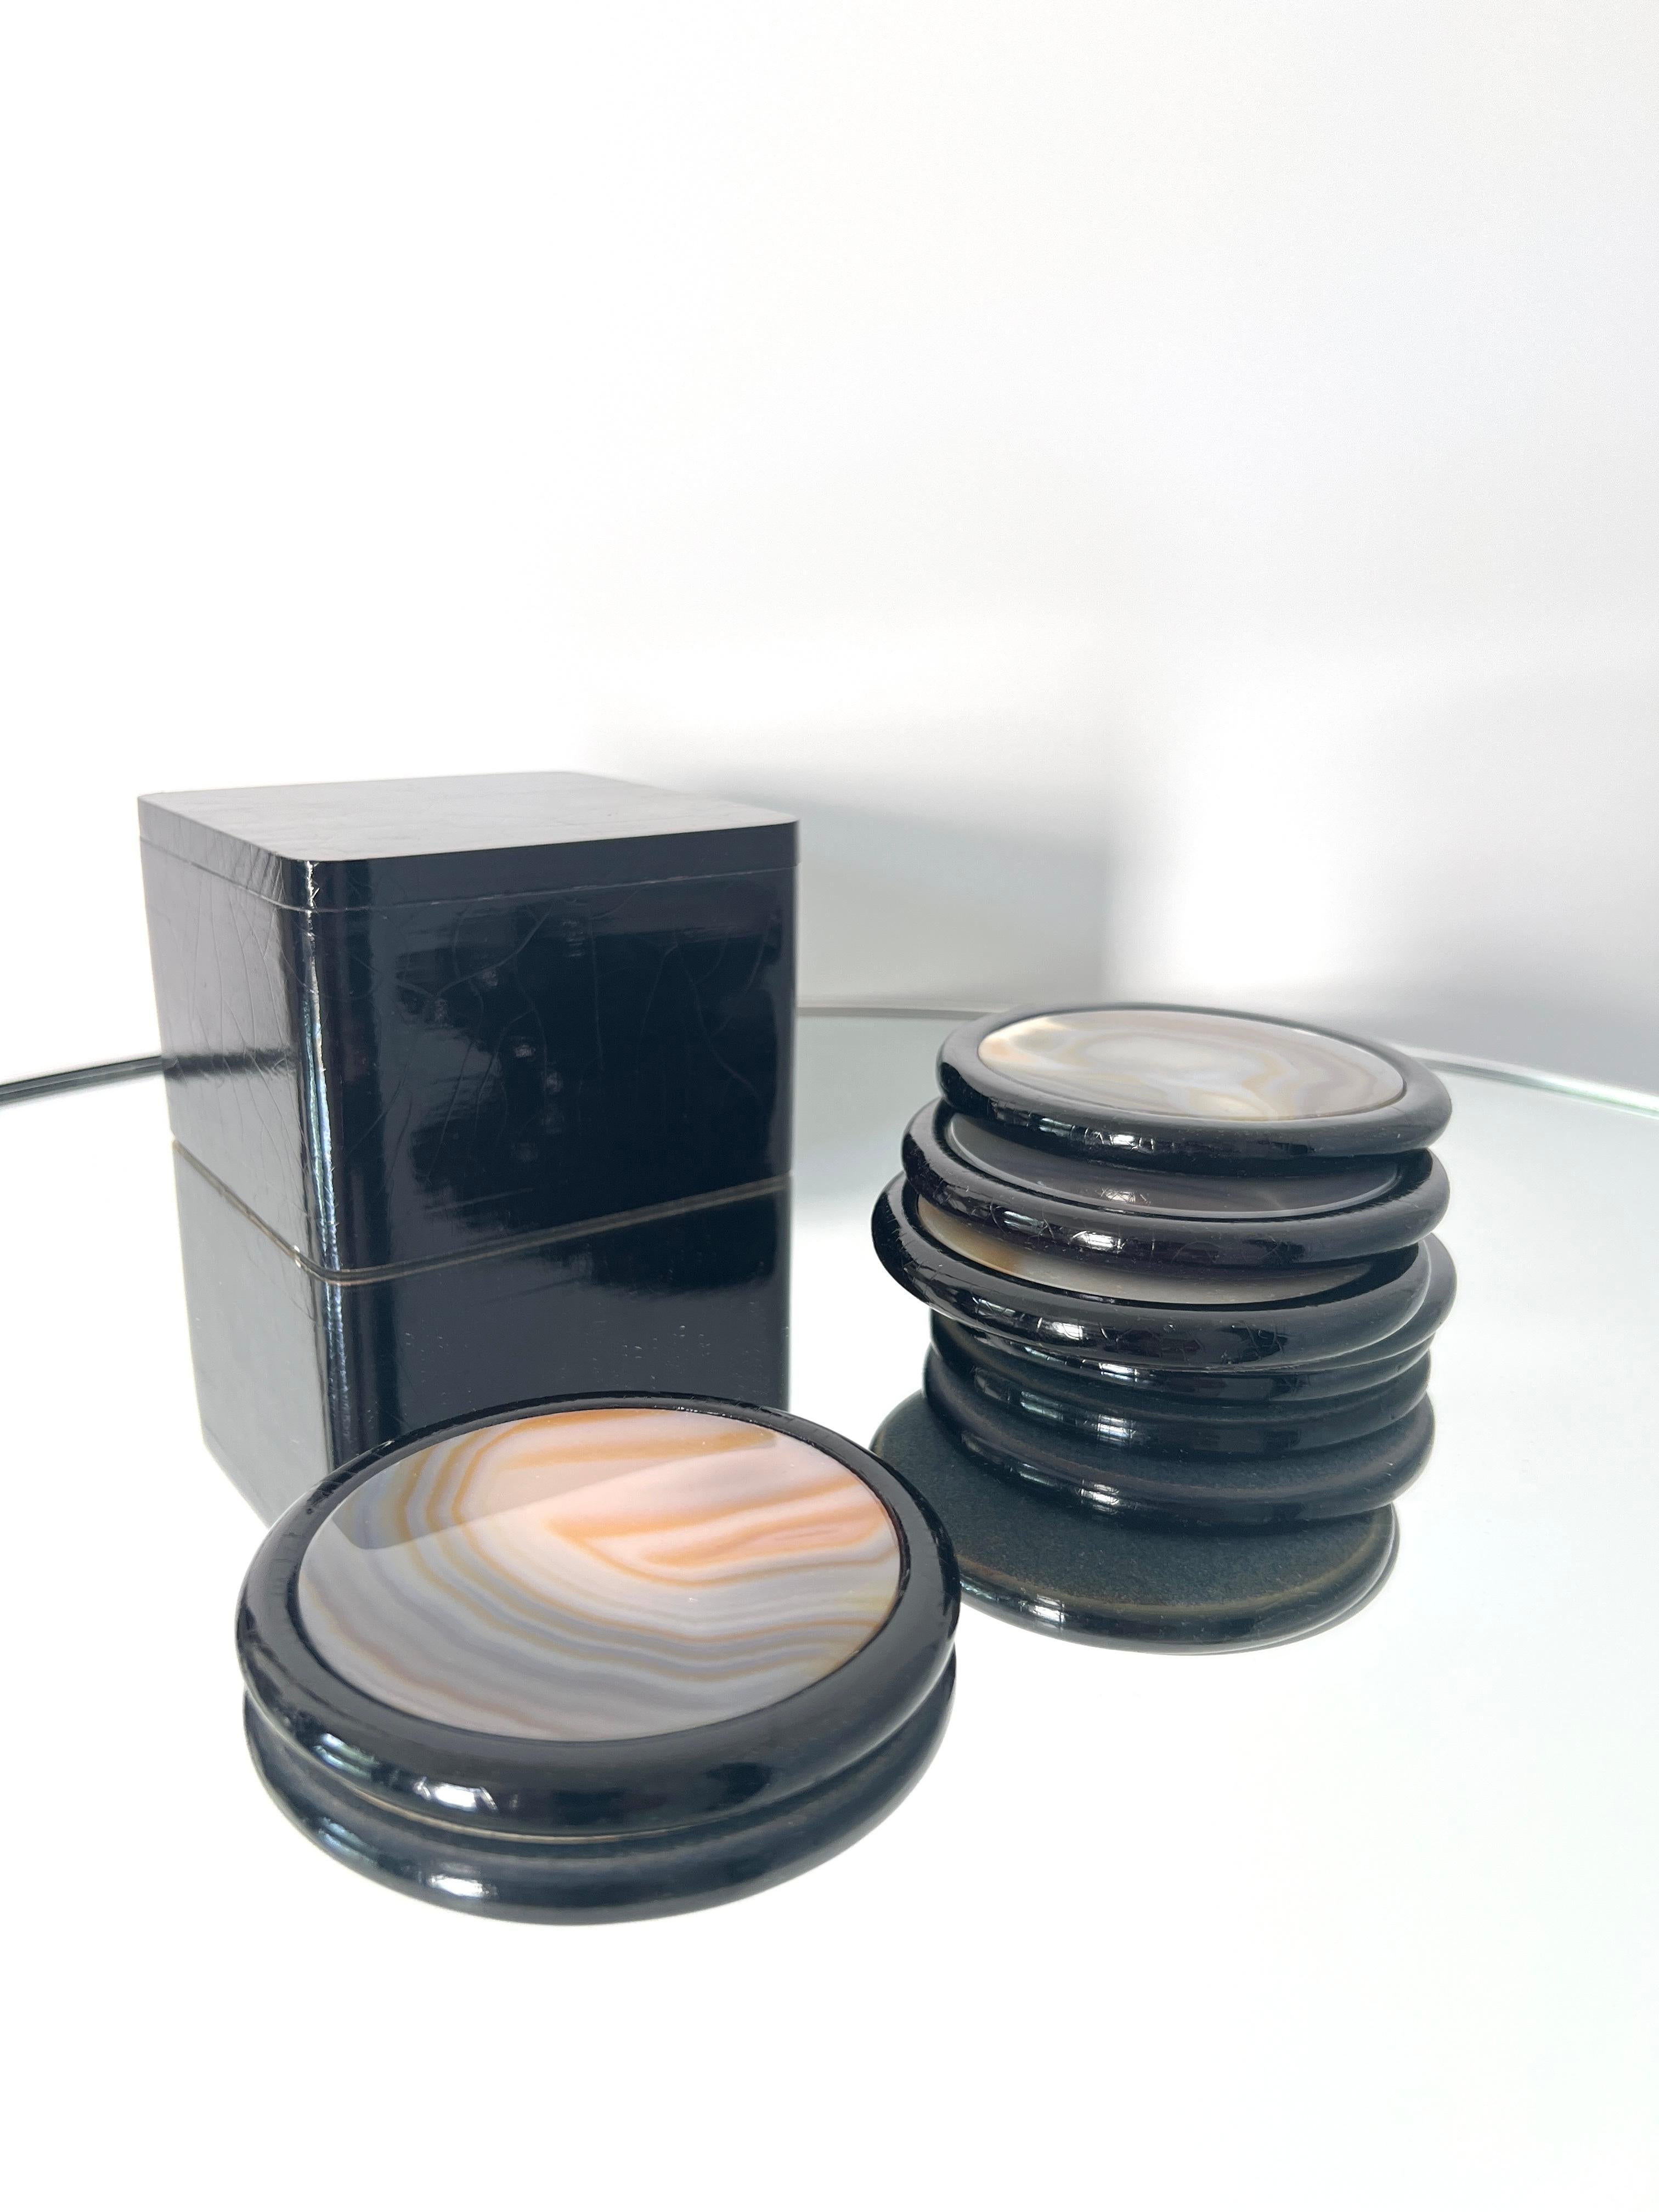 Mid-Century Modern Vintage Agate Coaster Box Set with Black Lacquered Finish, c. 1970s For Sale